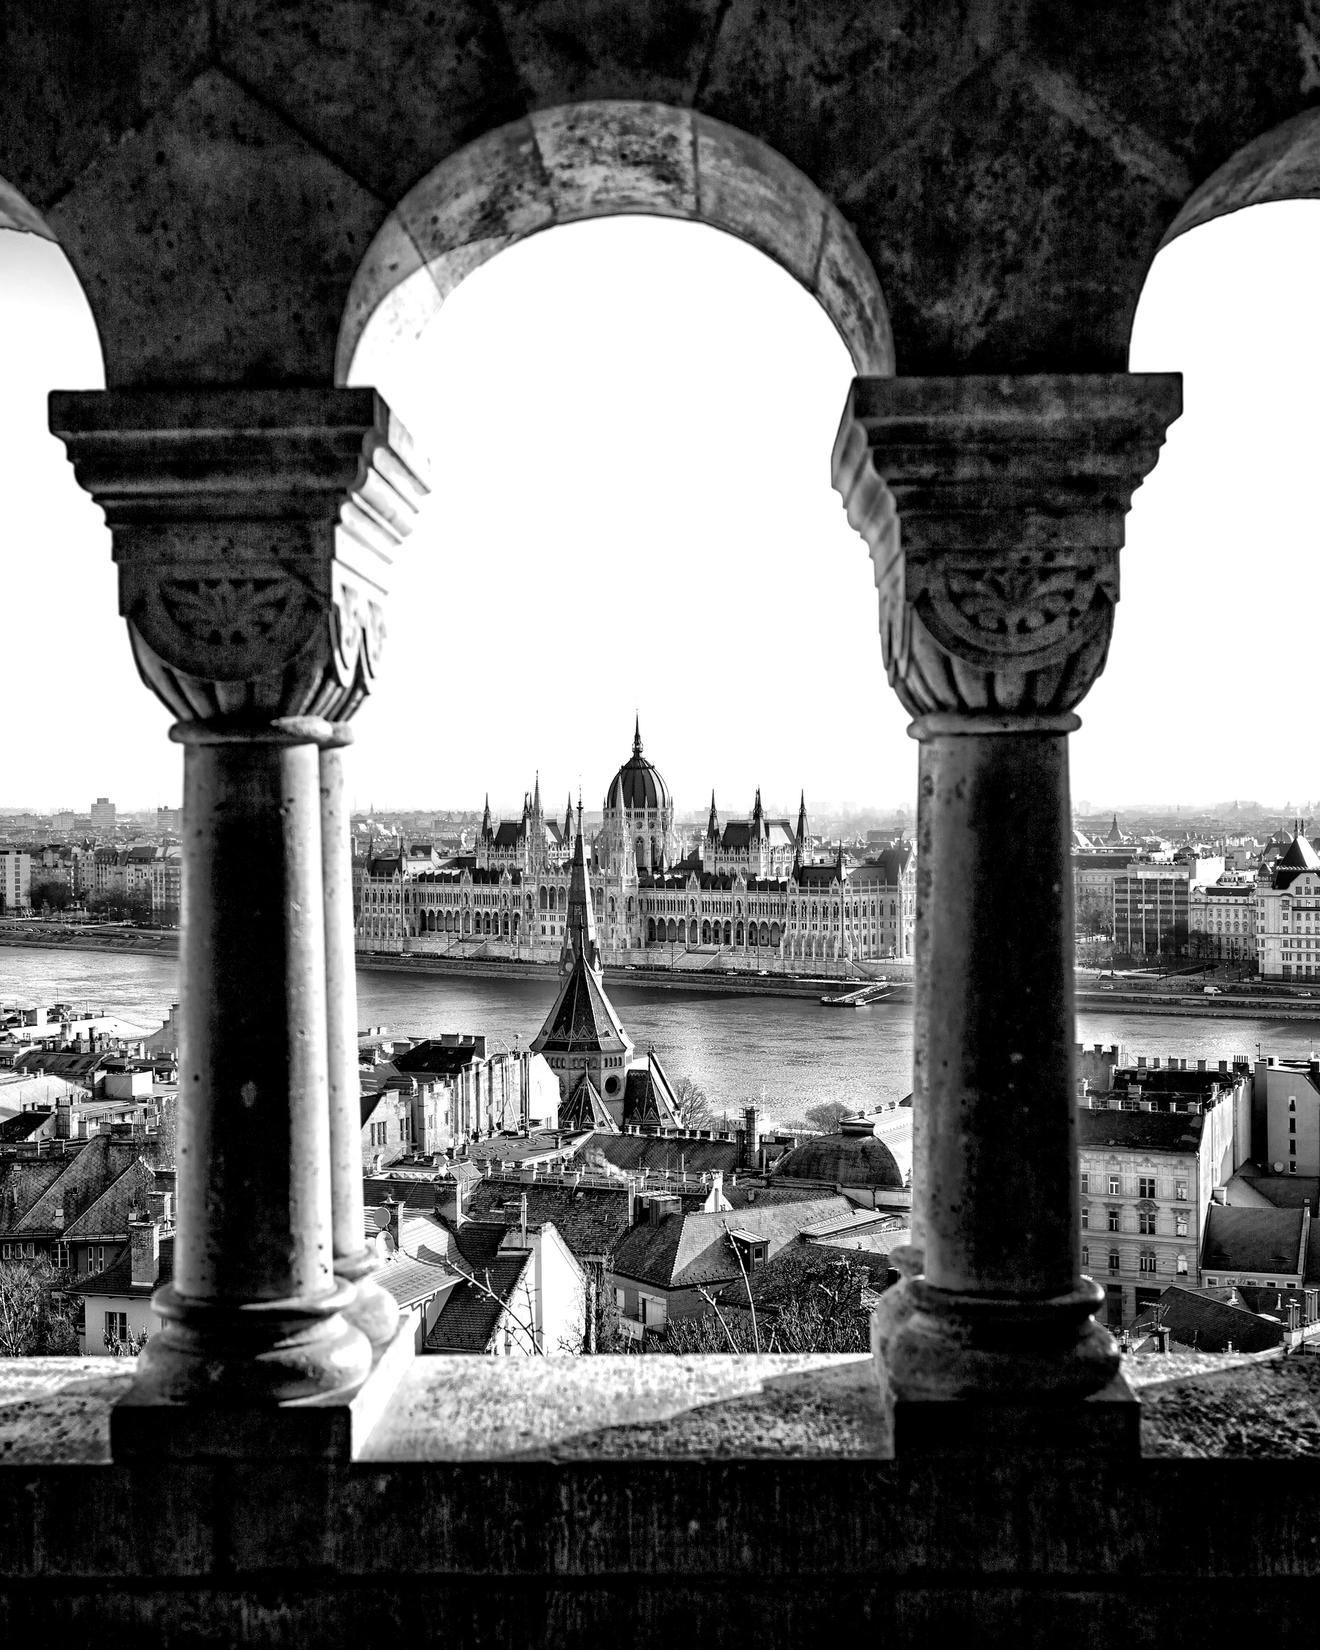 Black and white image taken through a triple window looking over the capital city of Hungary